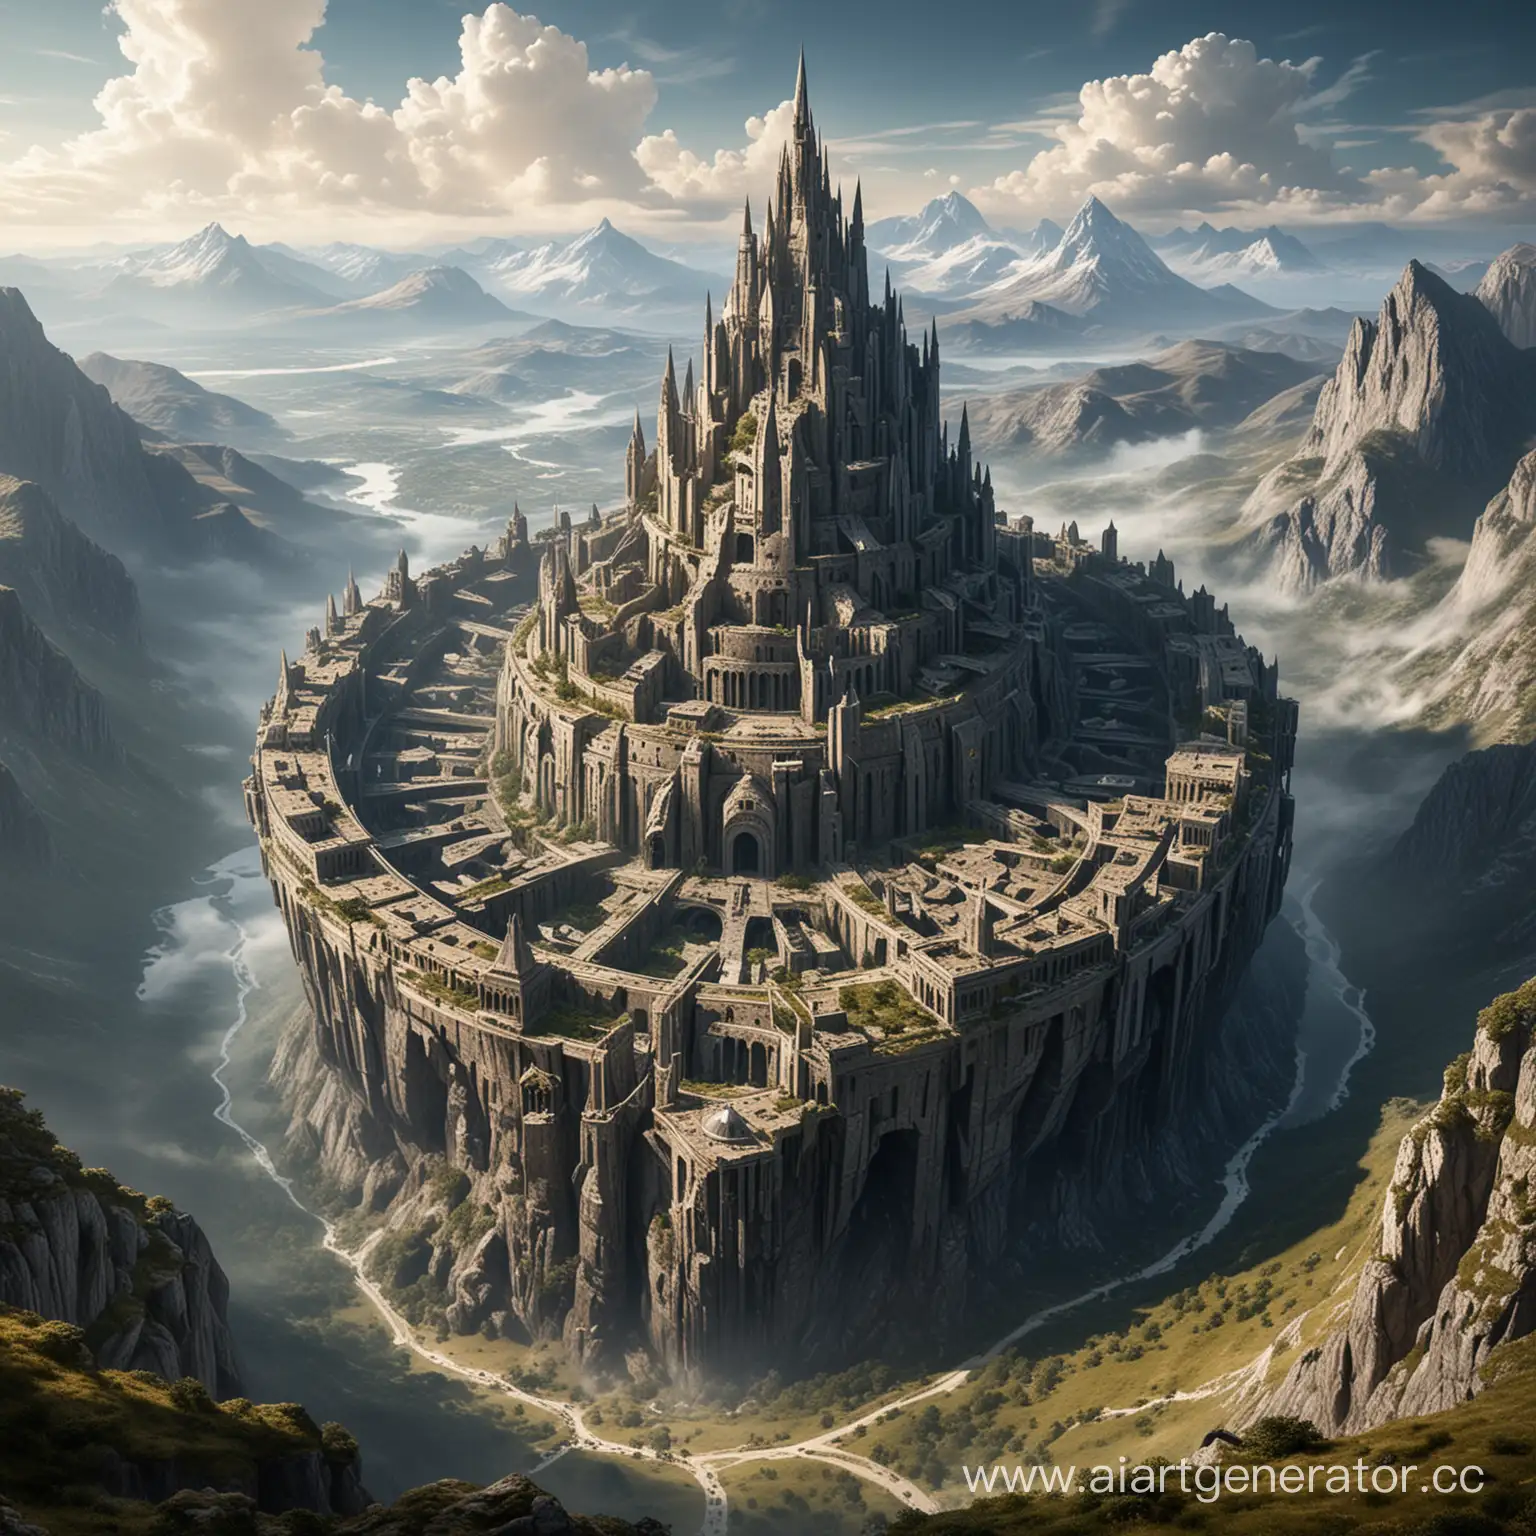 Impregnable-Spaceship-Fortress-Surrounding-RingShaped-Mountains